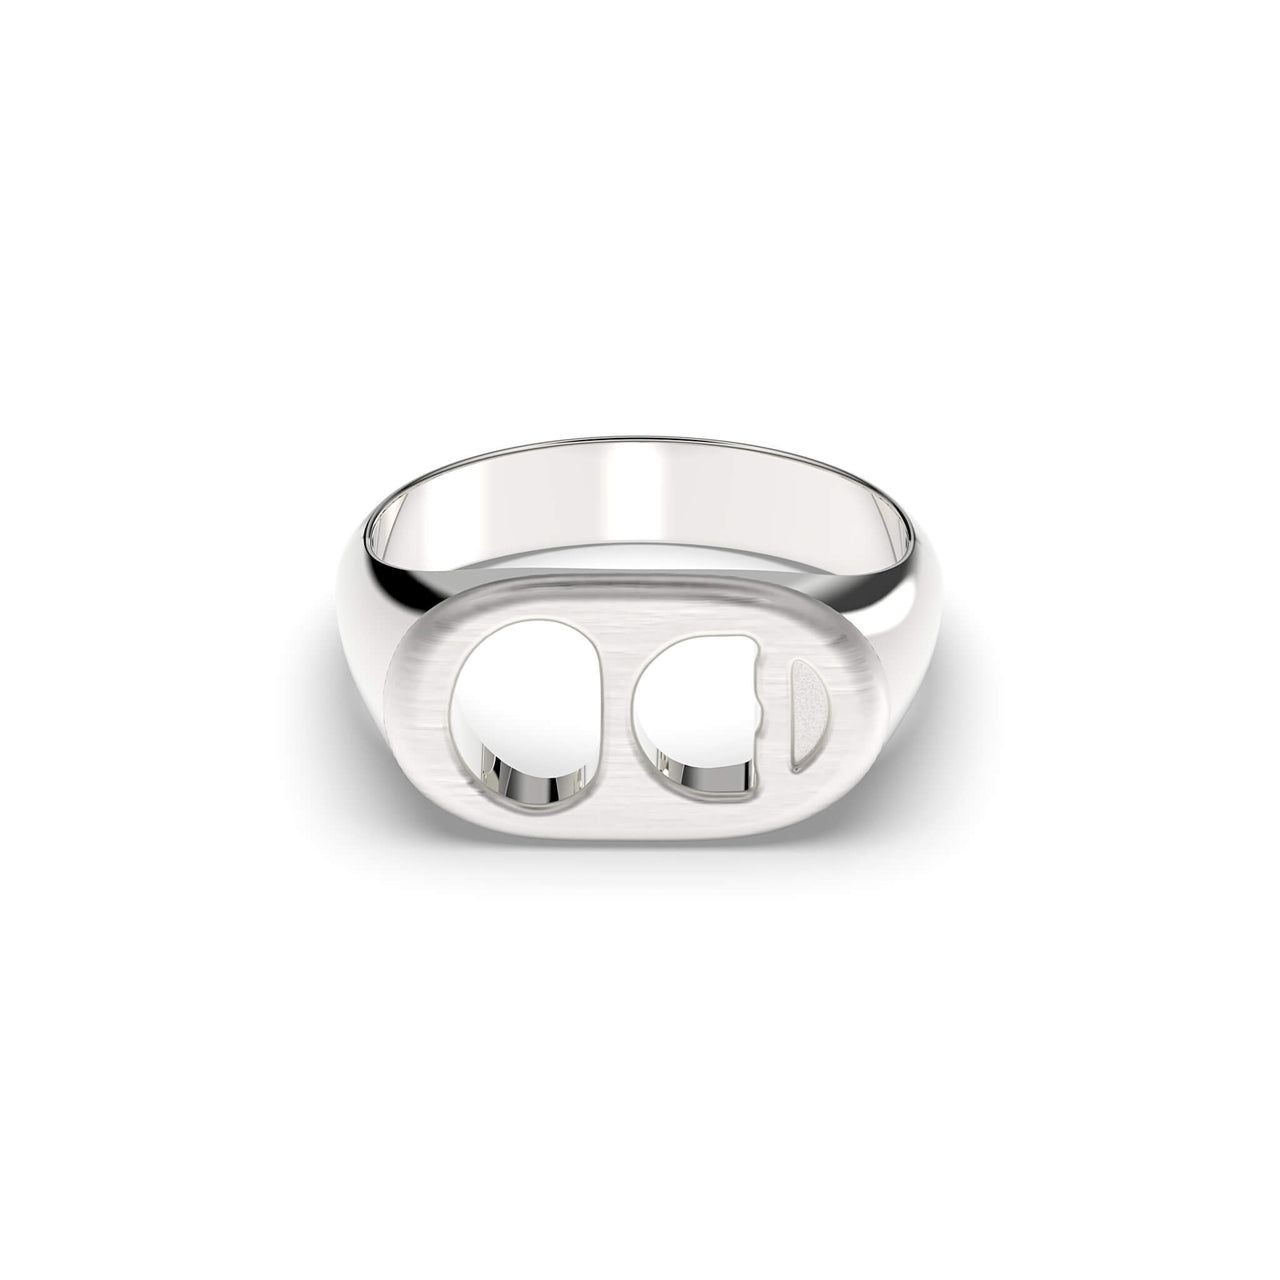 Solid Sterling Silver Ring - Ring Pull Ring